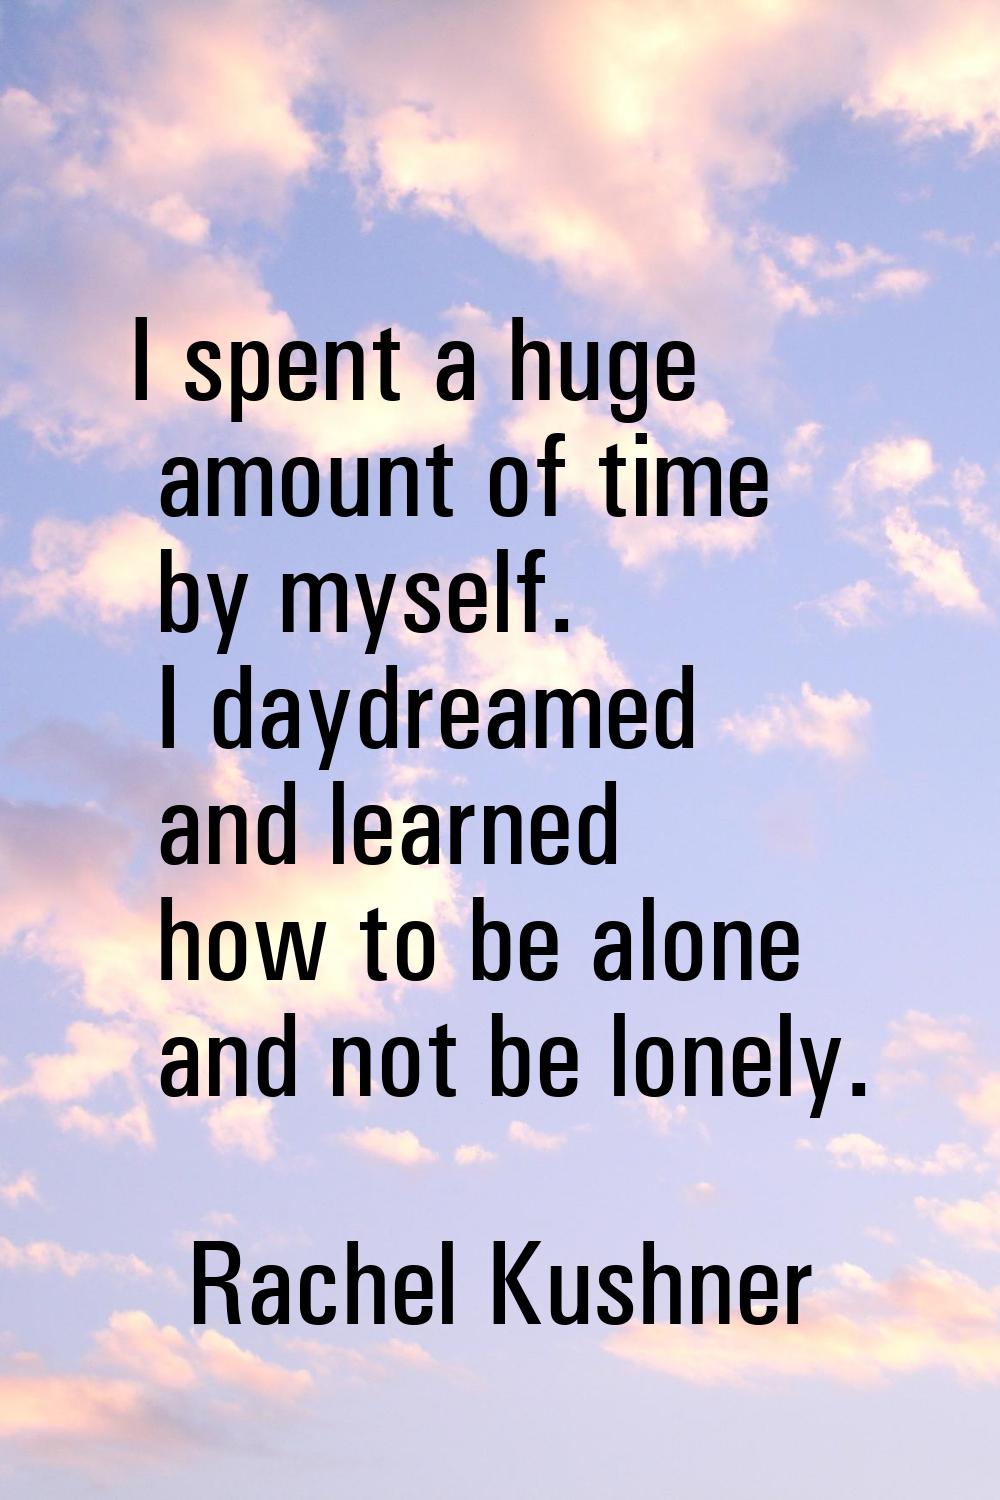 I spent a huge amount of time by myself. I daydreamed and learned how to be alone and not be lonely